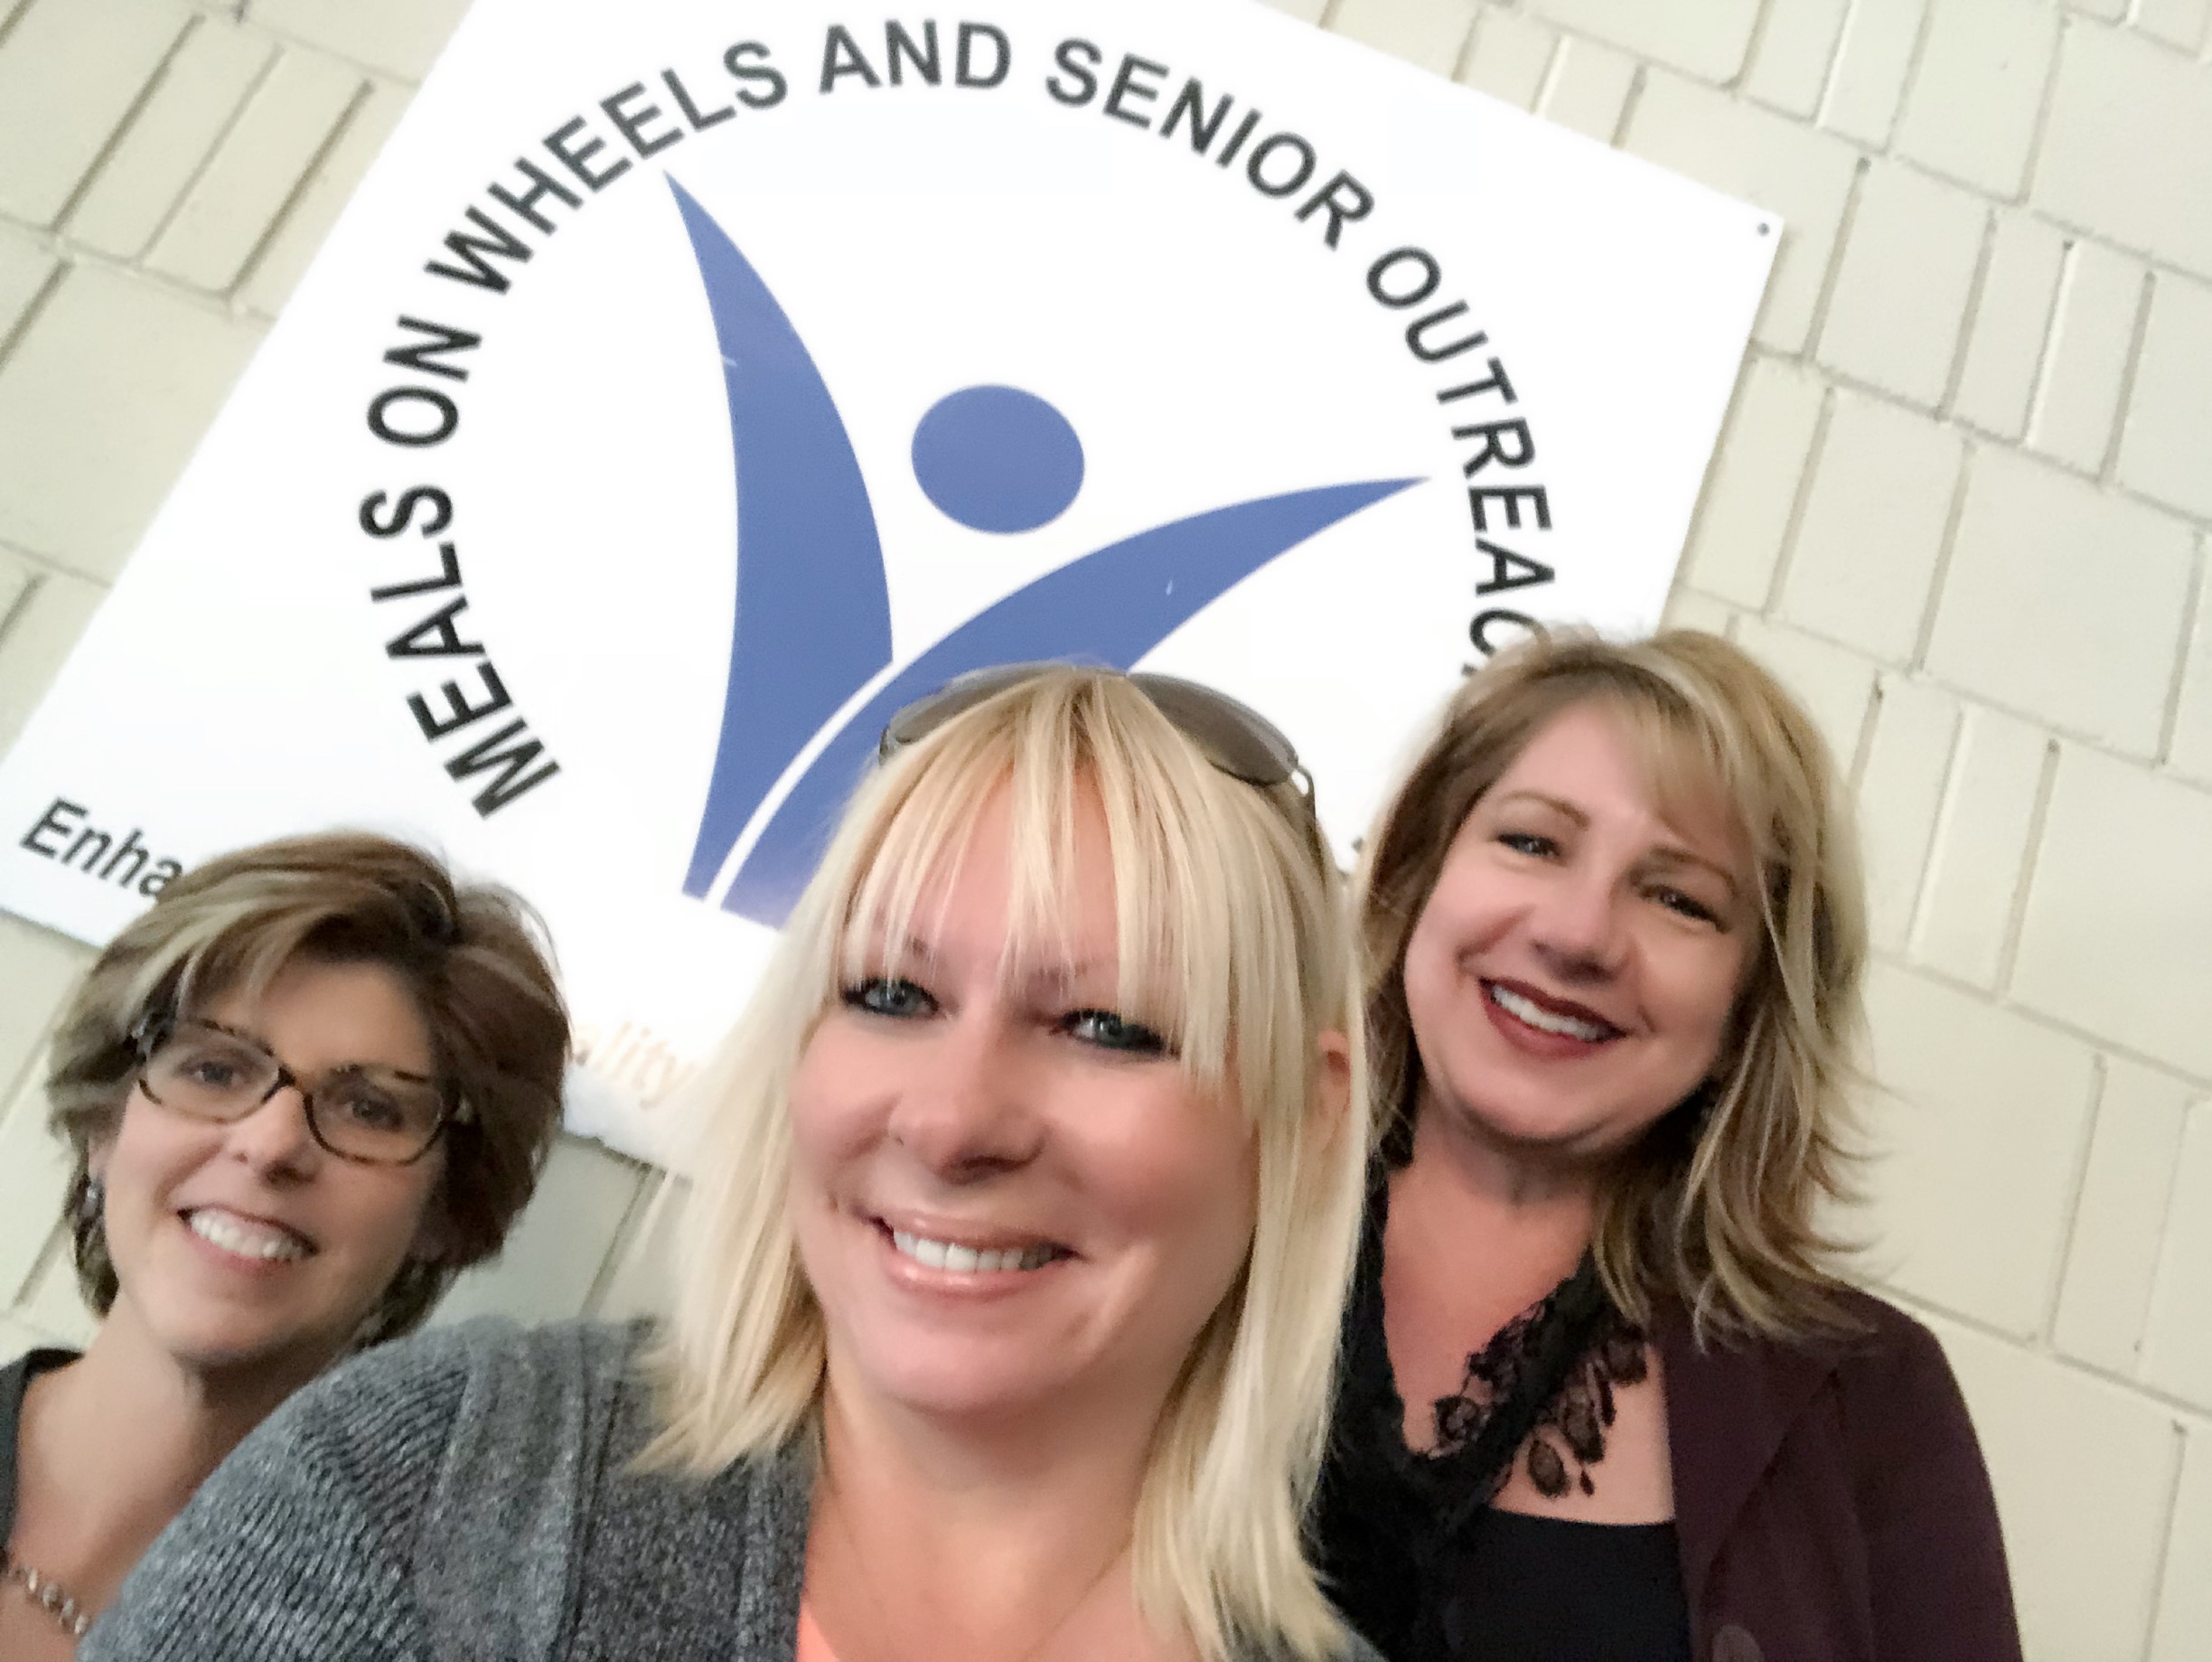 Meals on Wheels and Senior Outreach Services - October 24, 2017